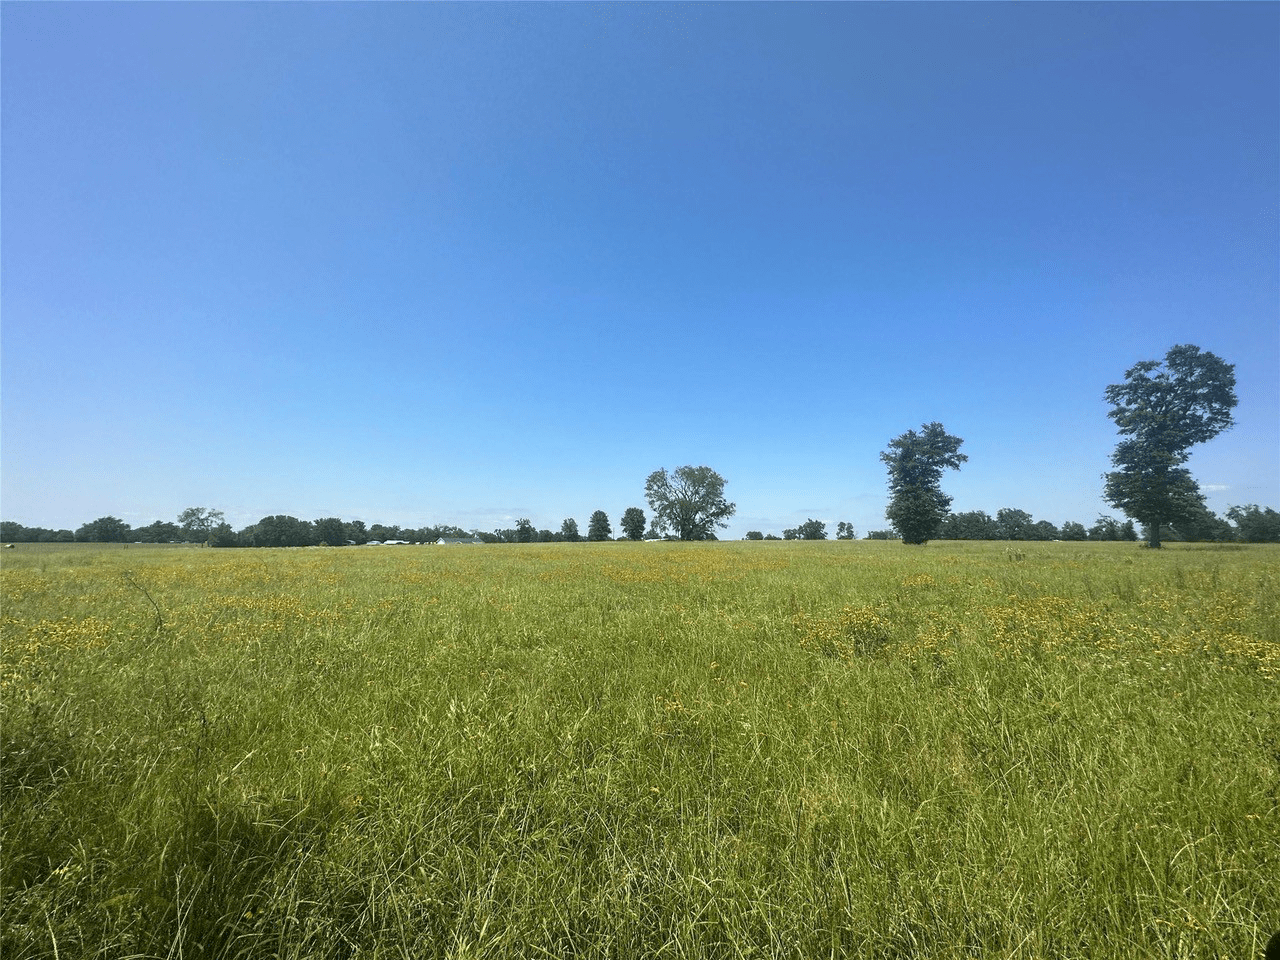 Grassy Acreage 13-Acre Tracts Just Came on the Market